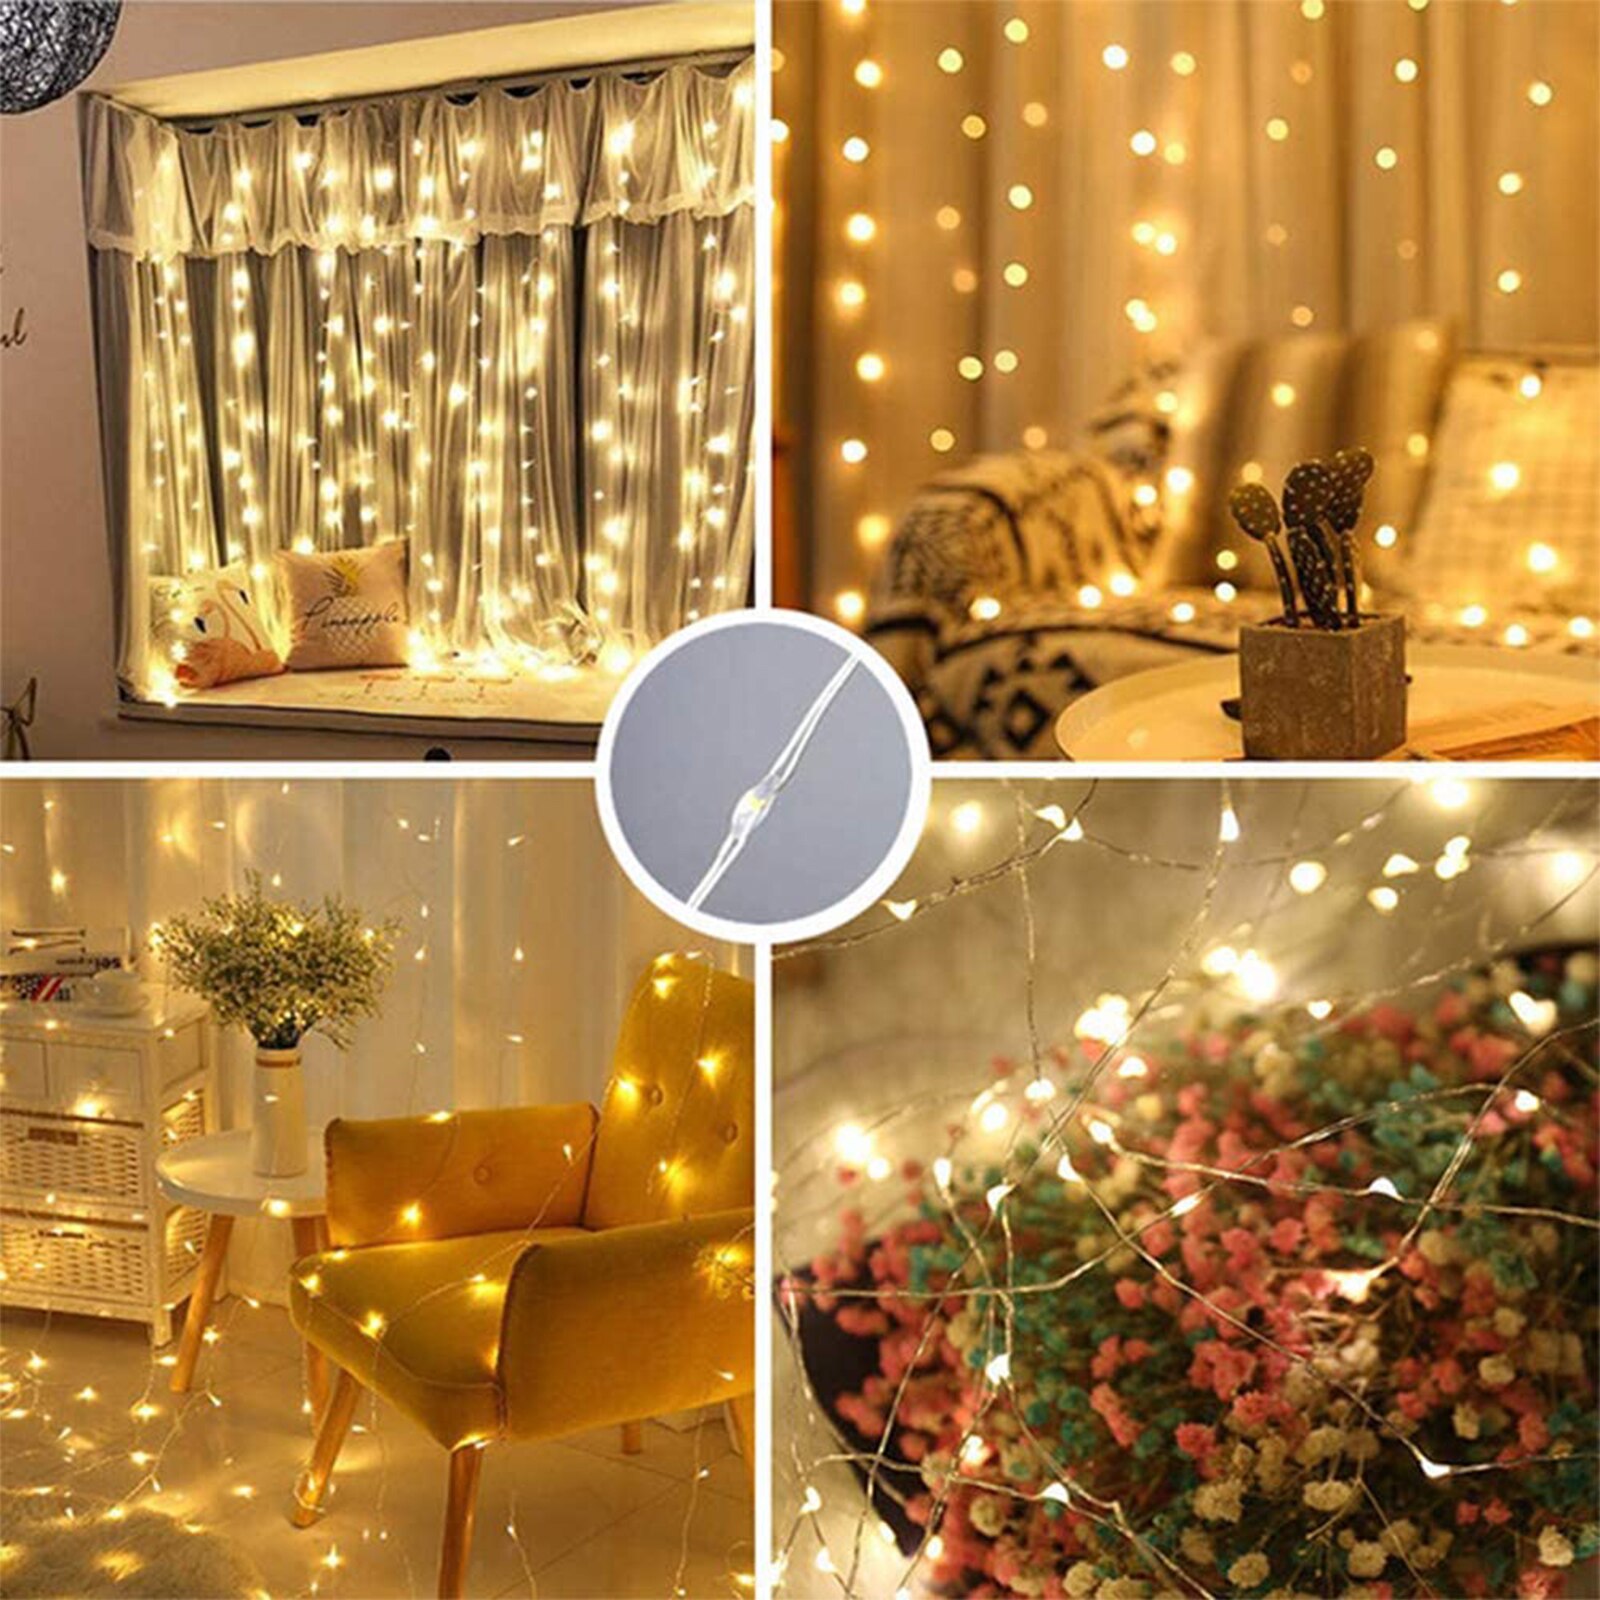 3M LED Fairy Curtain String Lights Garland 8 Mode USB Remote Control Curtain Lamp for Home New Year Holiday Christmas Decoration